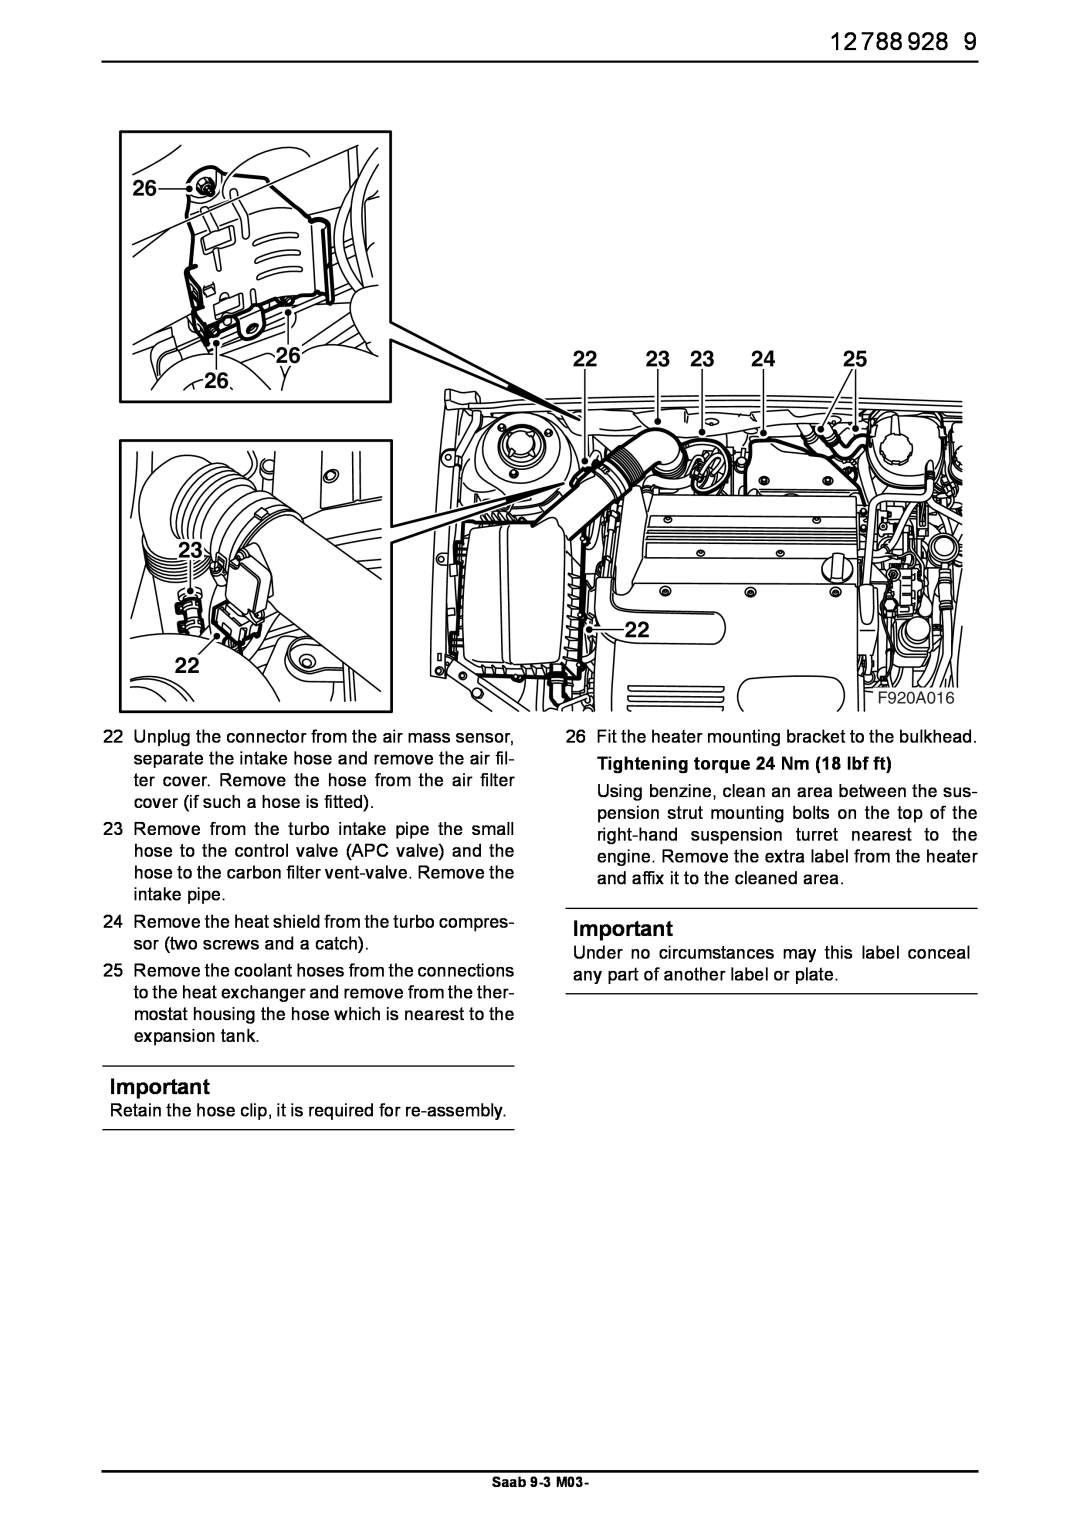 Saab 9-3 M03 installation instructions 26Fit the heater mounting bracket to the bulkhead, Tightening torque 24 Nm 18 lbf ft 